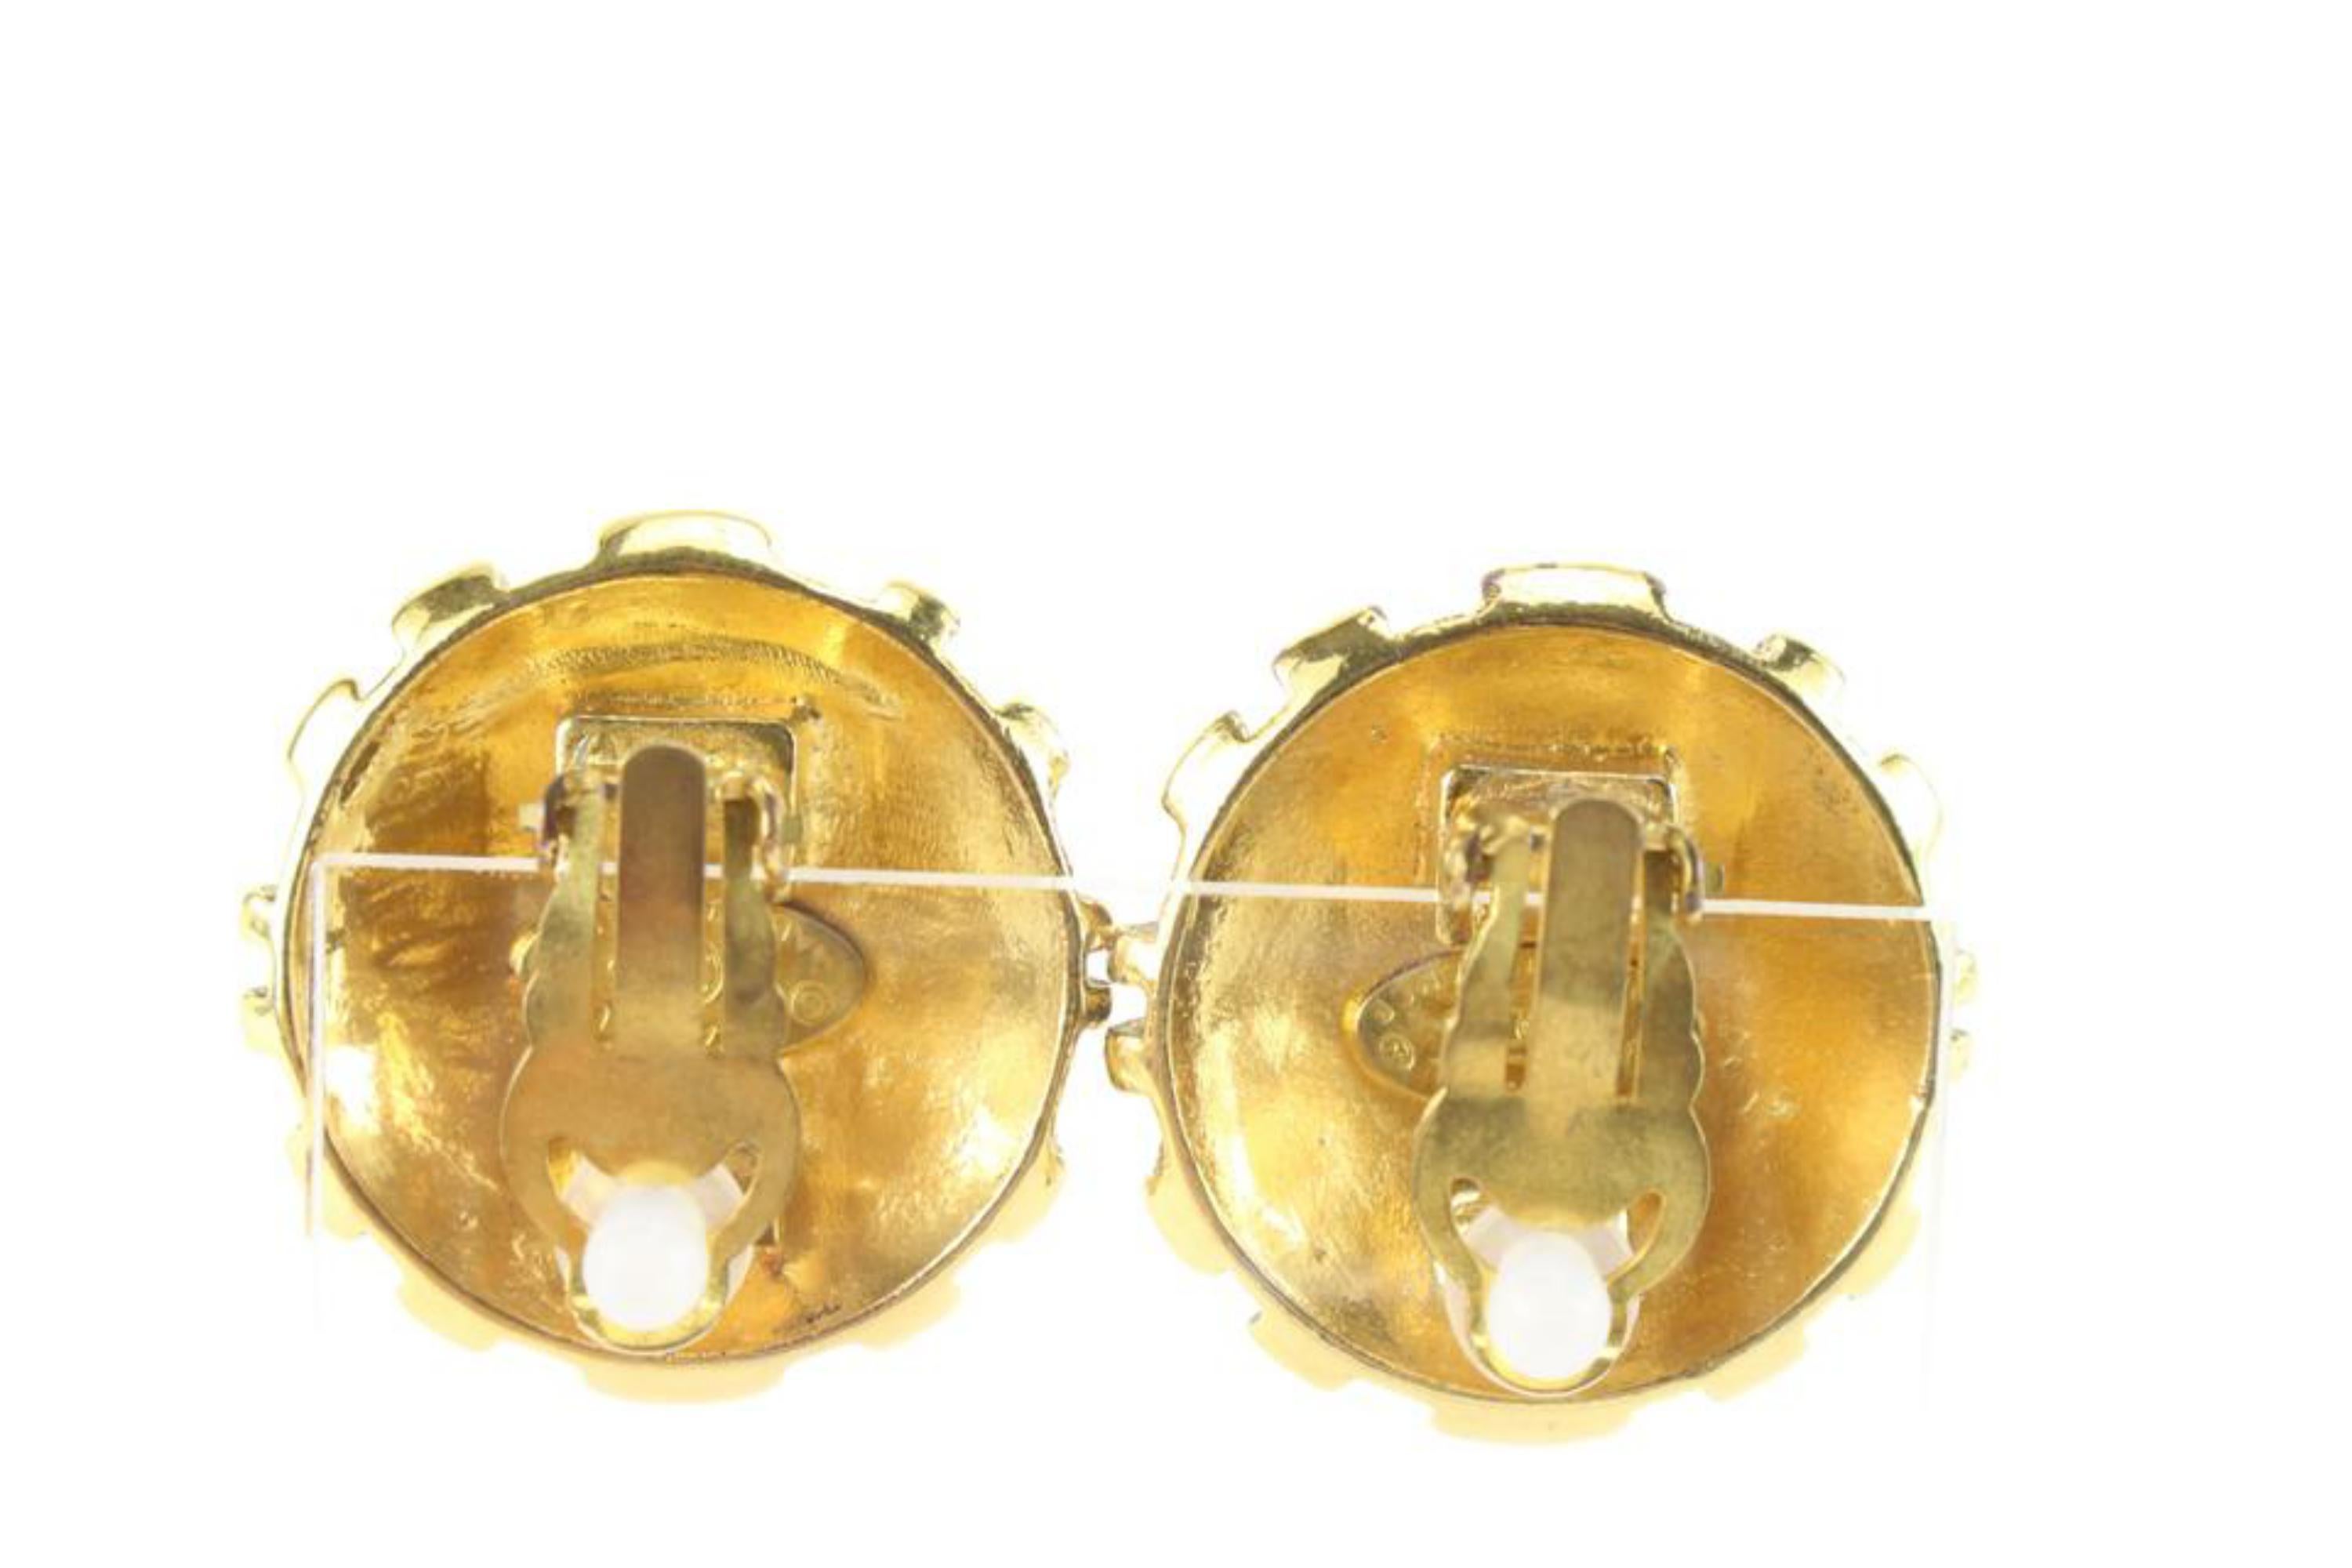 Chanel 24k Gold Plated 25 Collection Jumbo CC Logo Earrings 60ch825s In Good Condition For Sale In Dix hills, NY